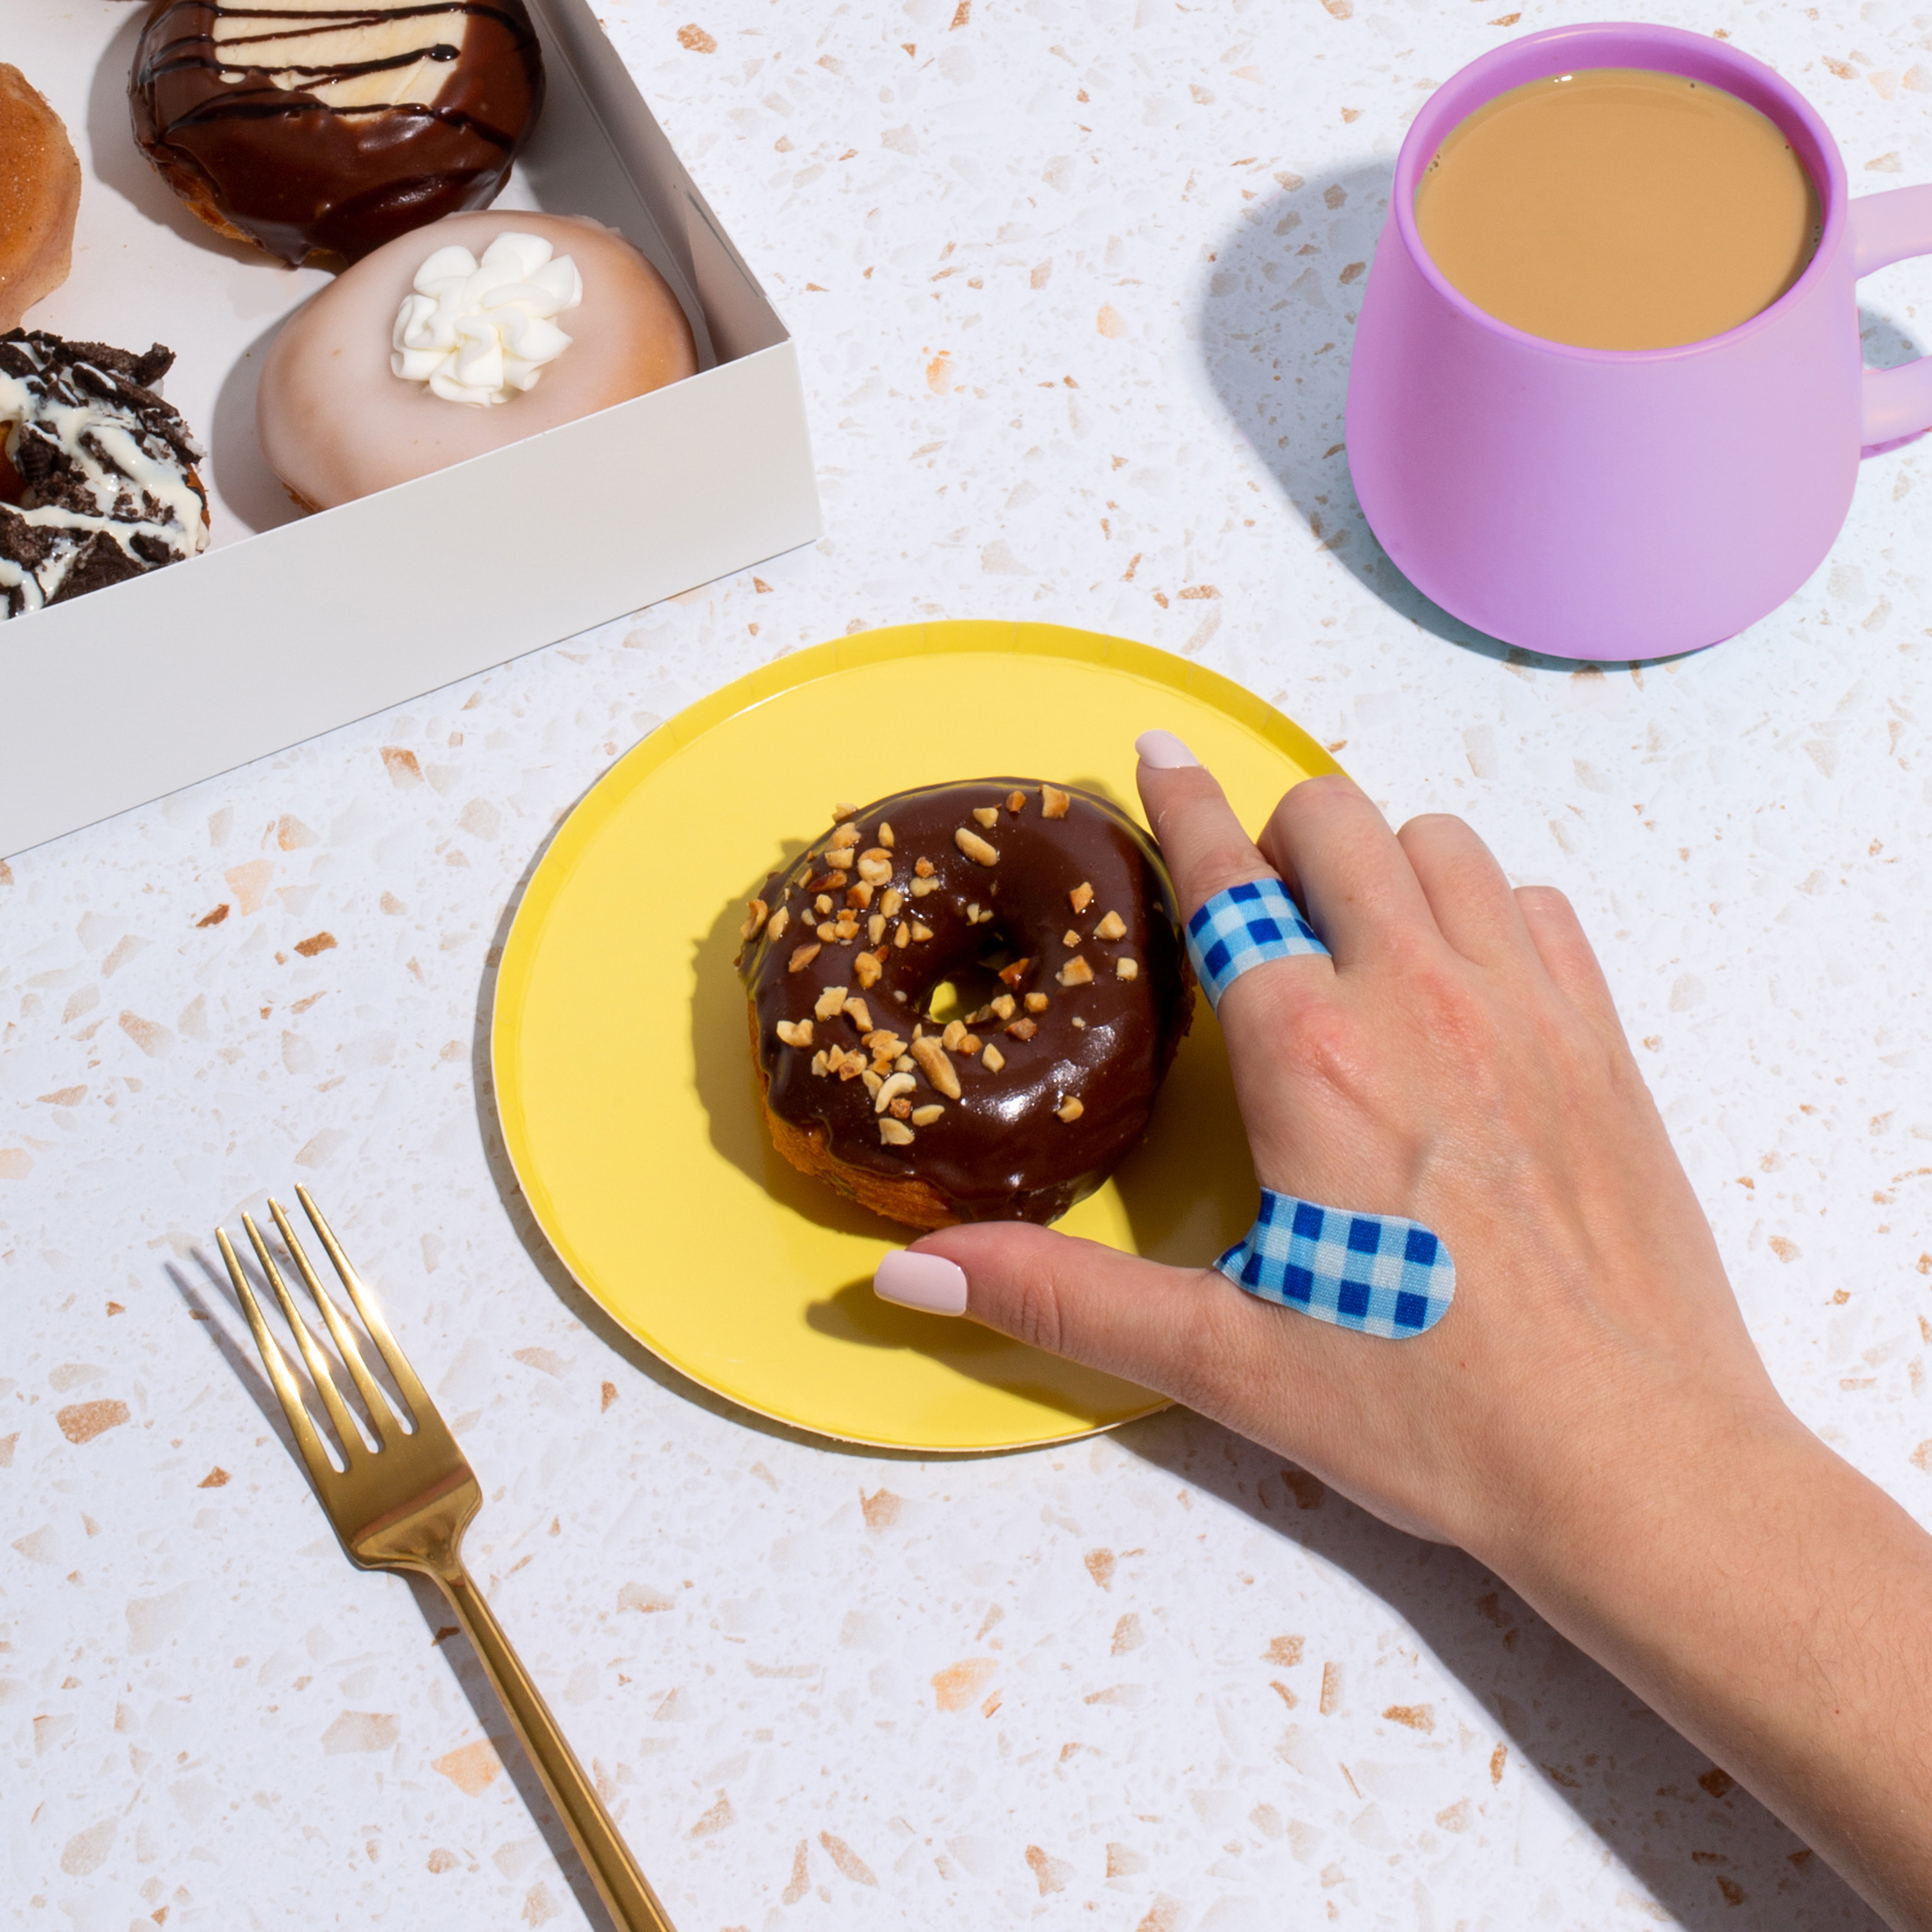 hand with blue gingham bandages on reaching in to grab donut